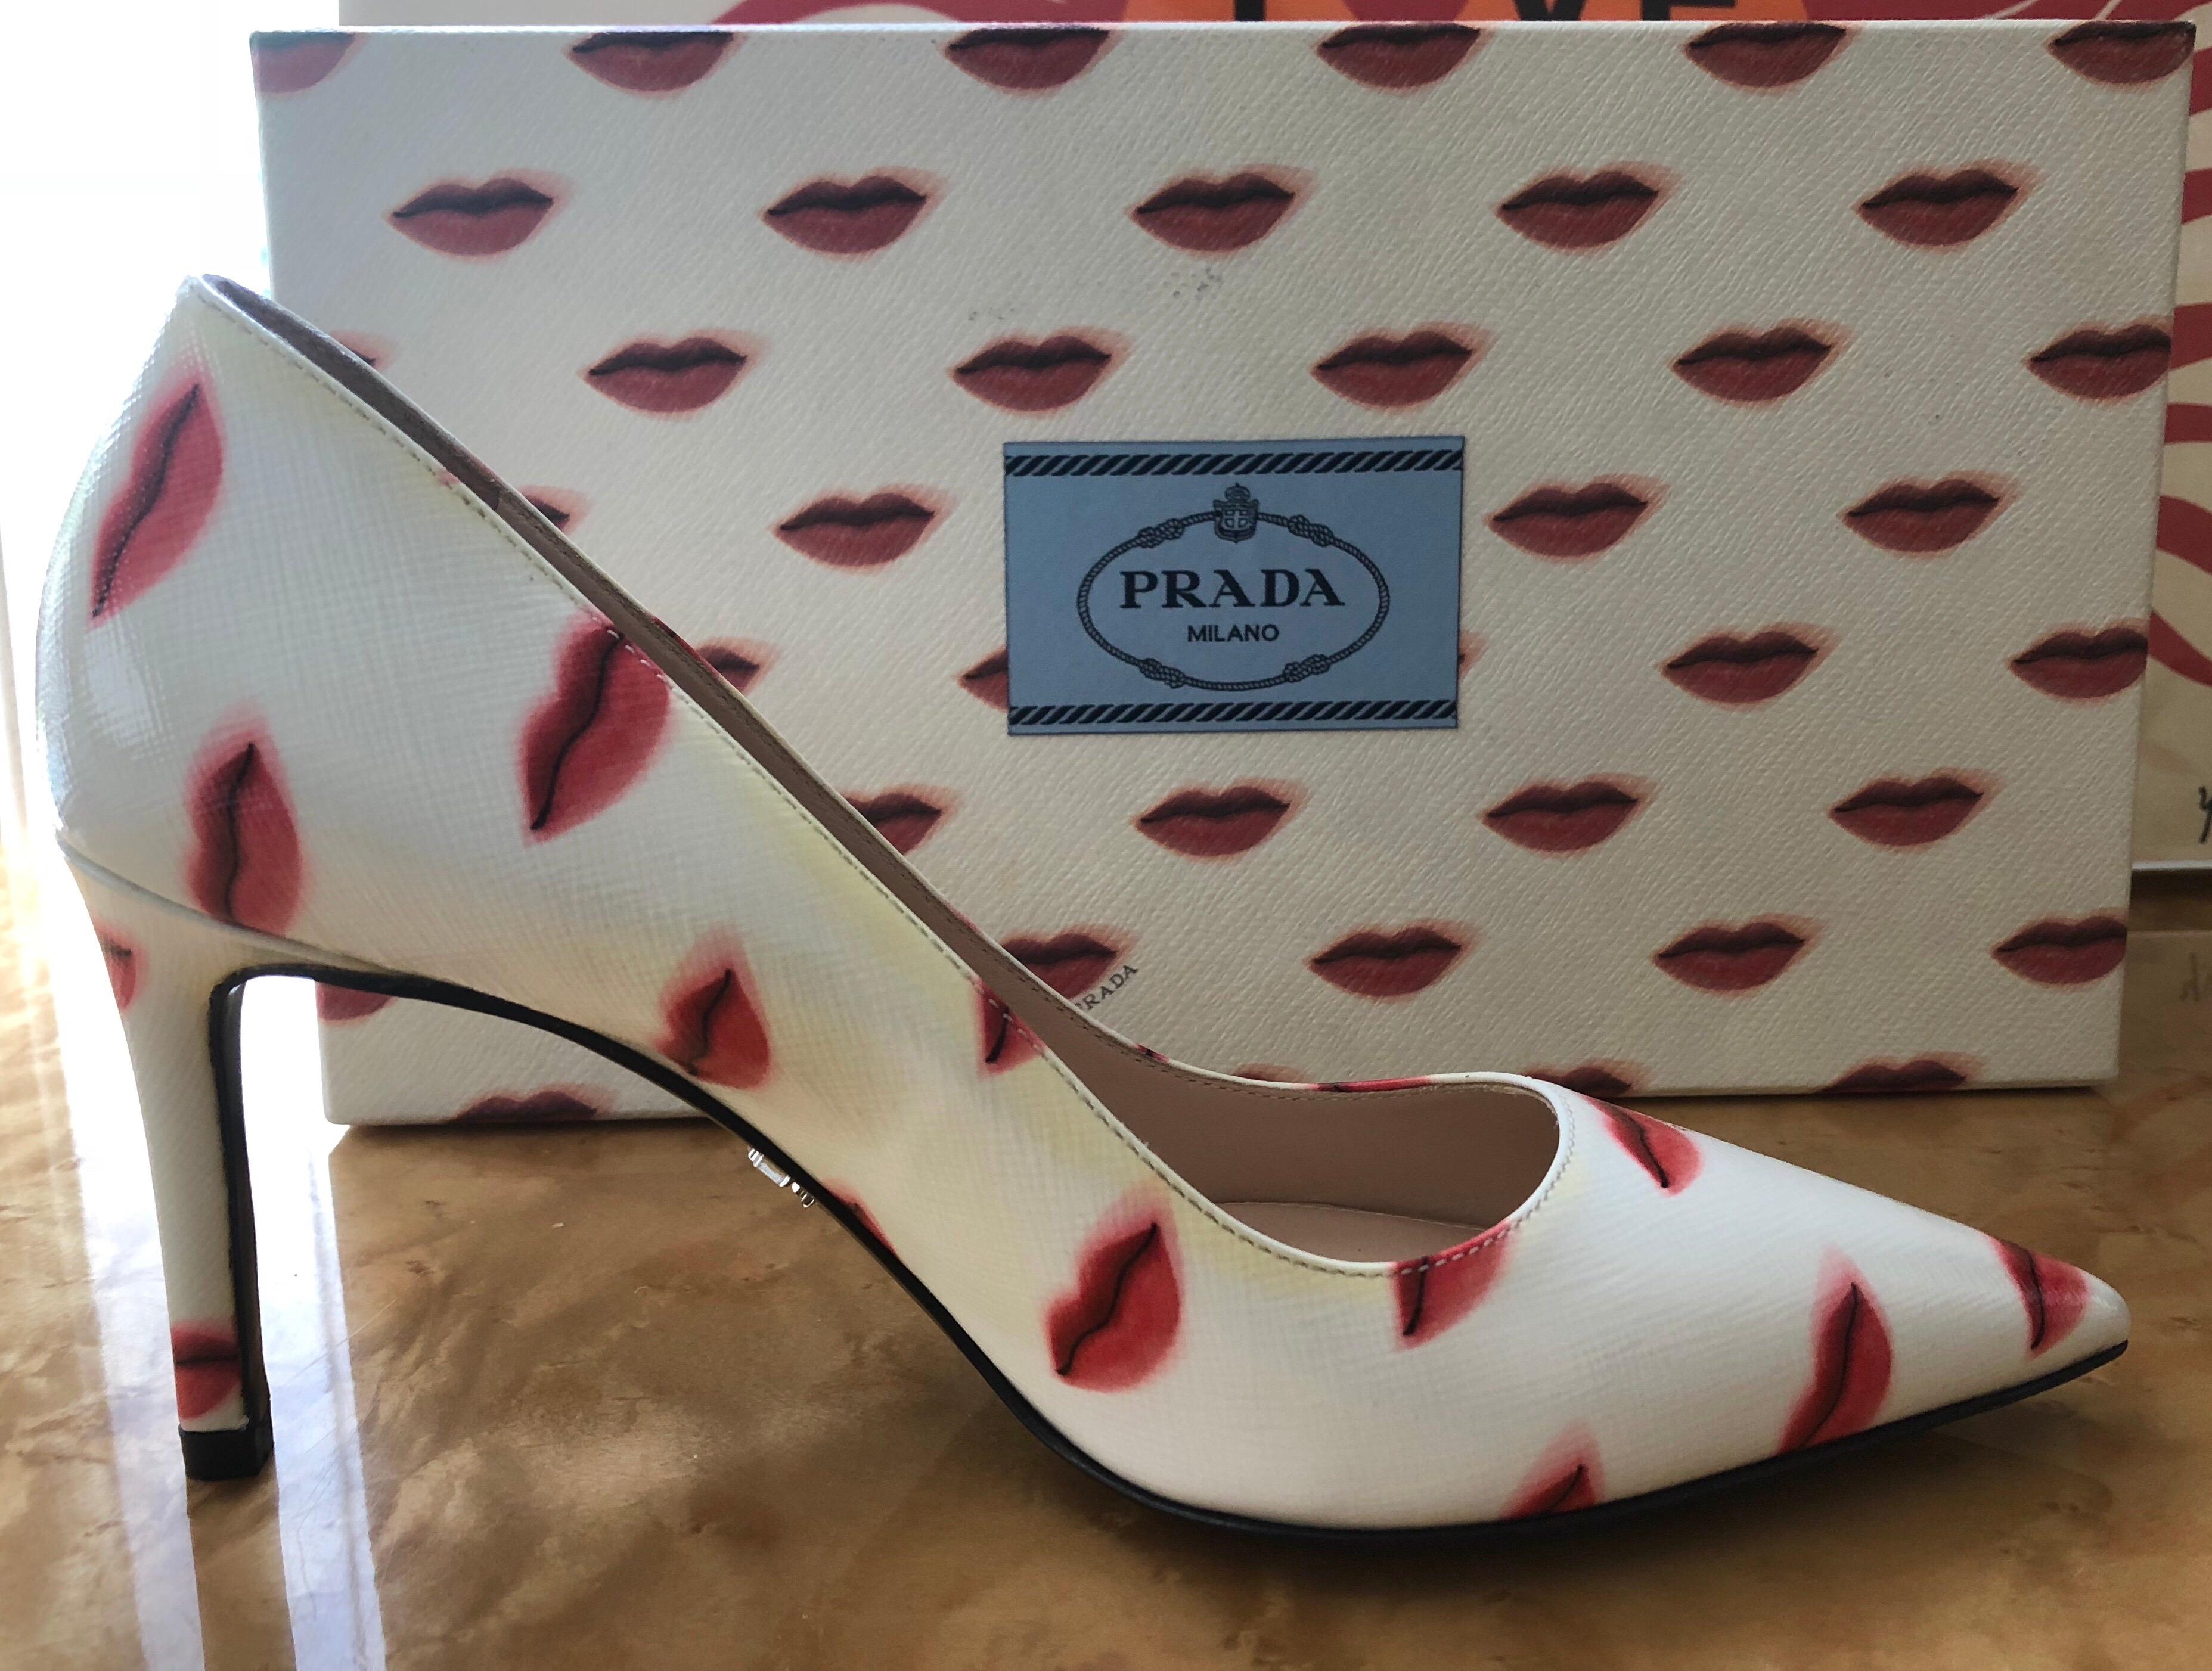 Prada Saffiano Leather Red Ivory Lip Point Toe Pumps Heels Shoes In New Condition For Sale In Boca Raton, FL